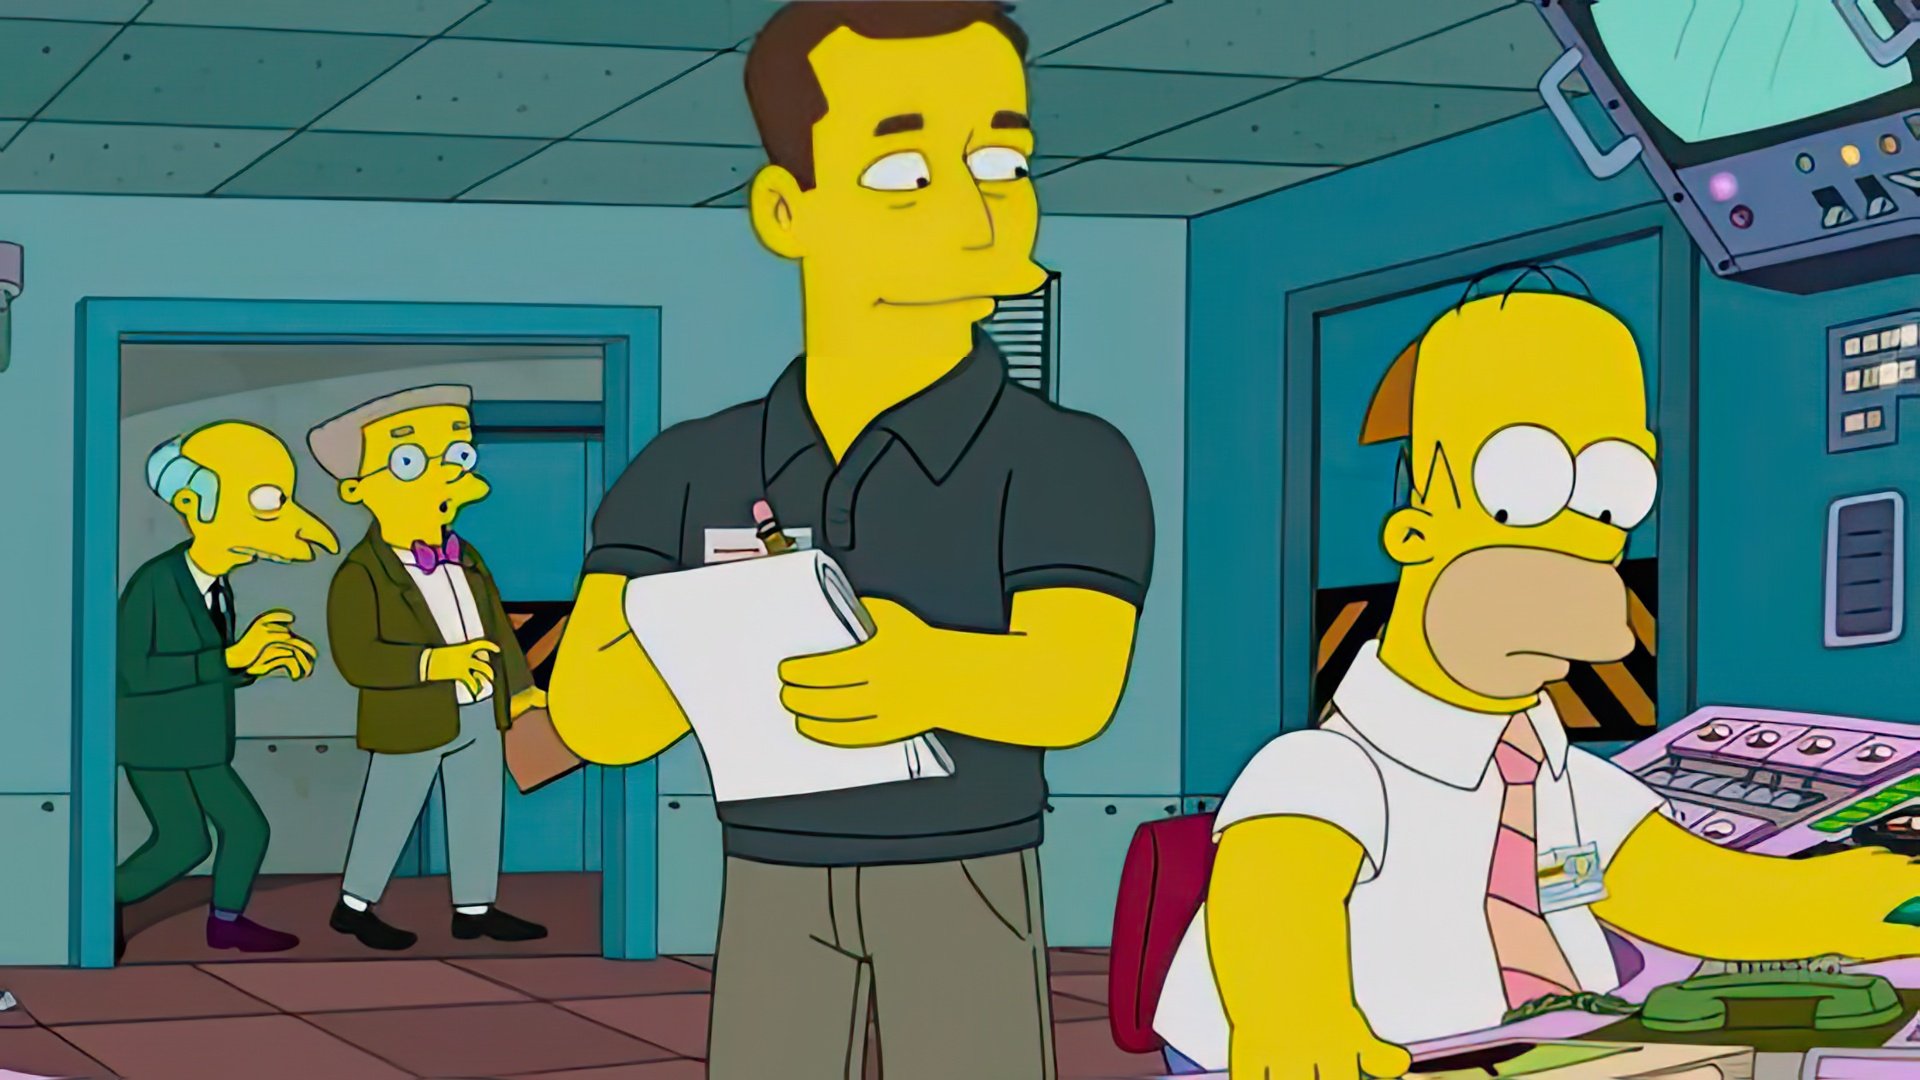 Elon Musk appeared in The Simpsons